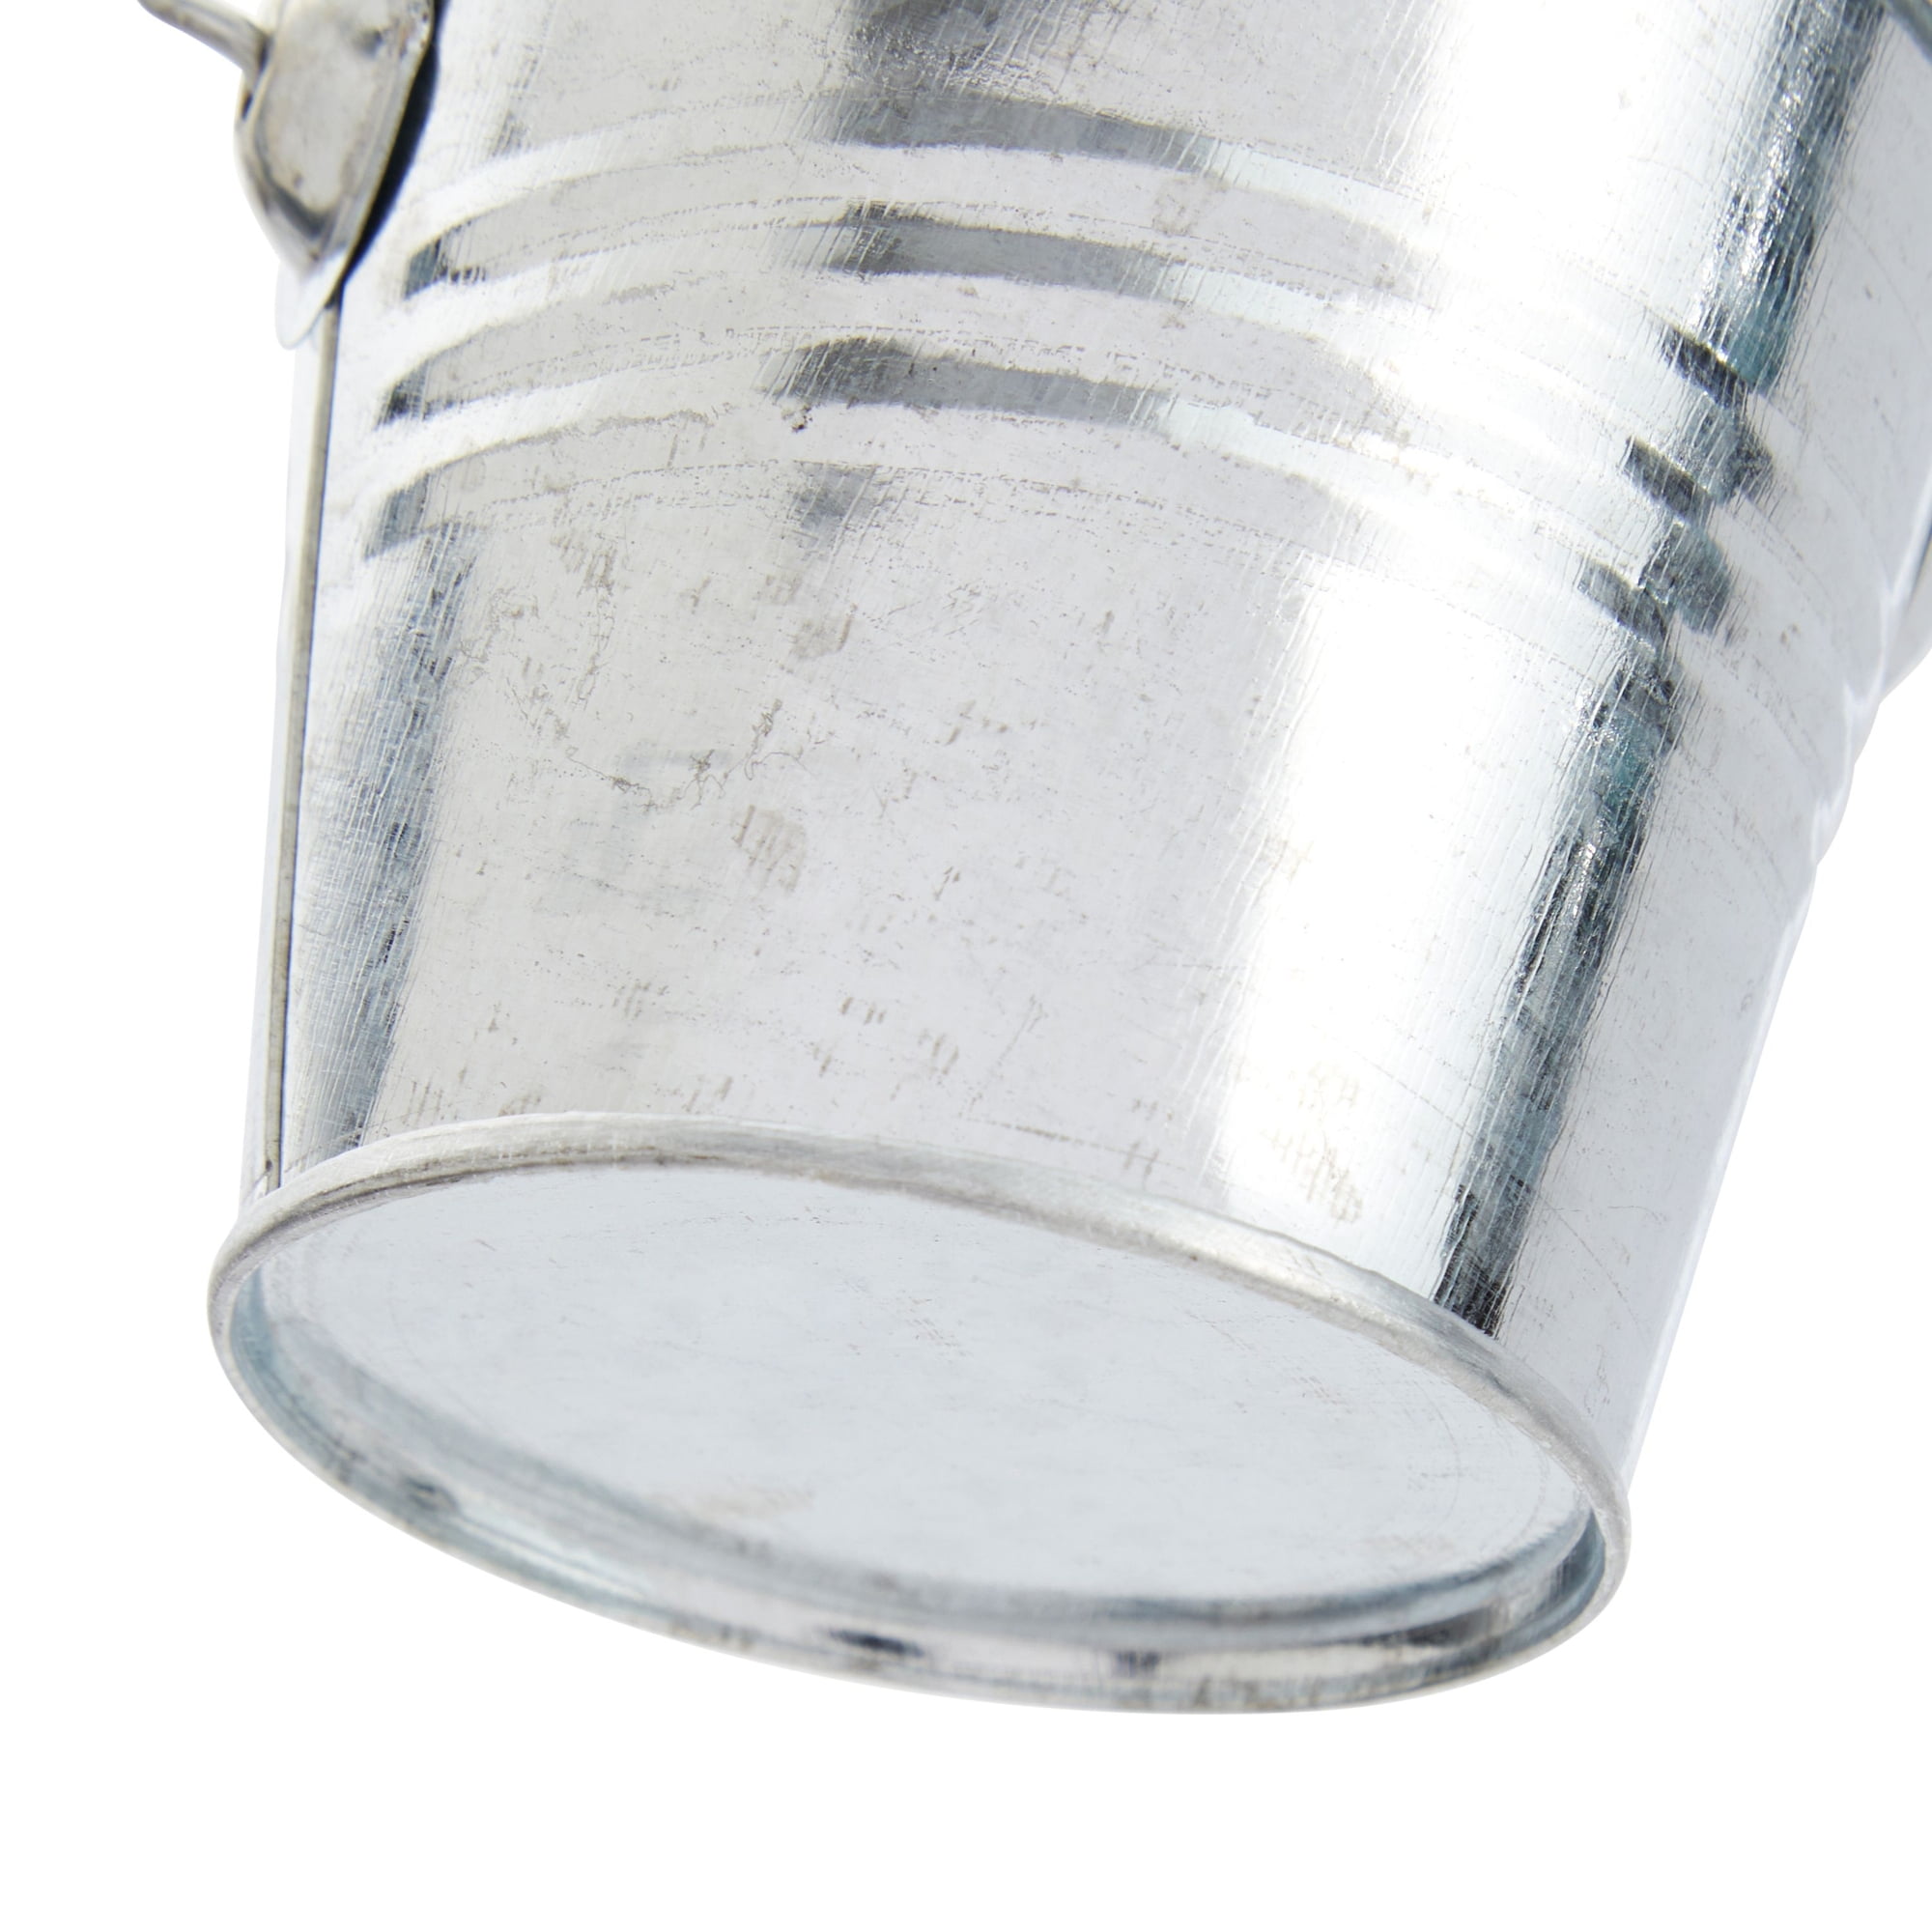 Wholesale Sliver galvanized steel small bucket with handle 3L 4L